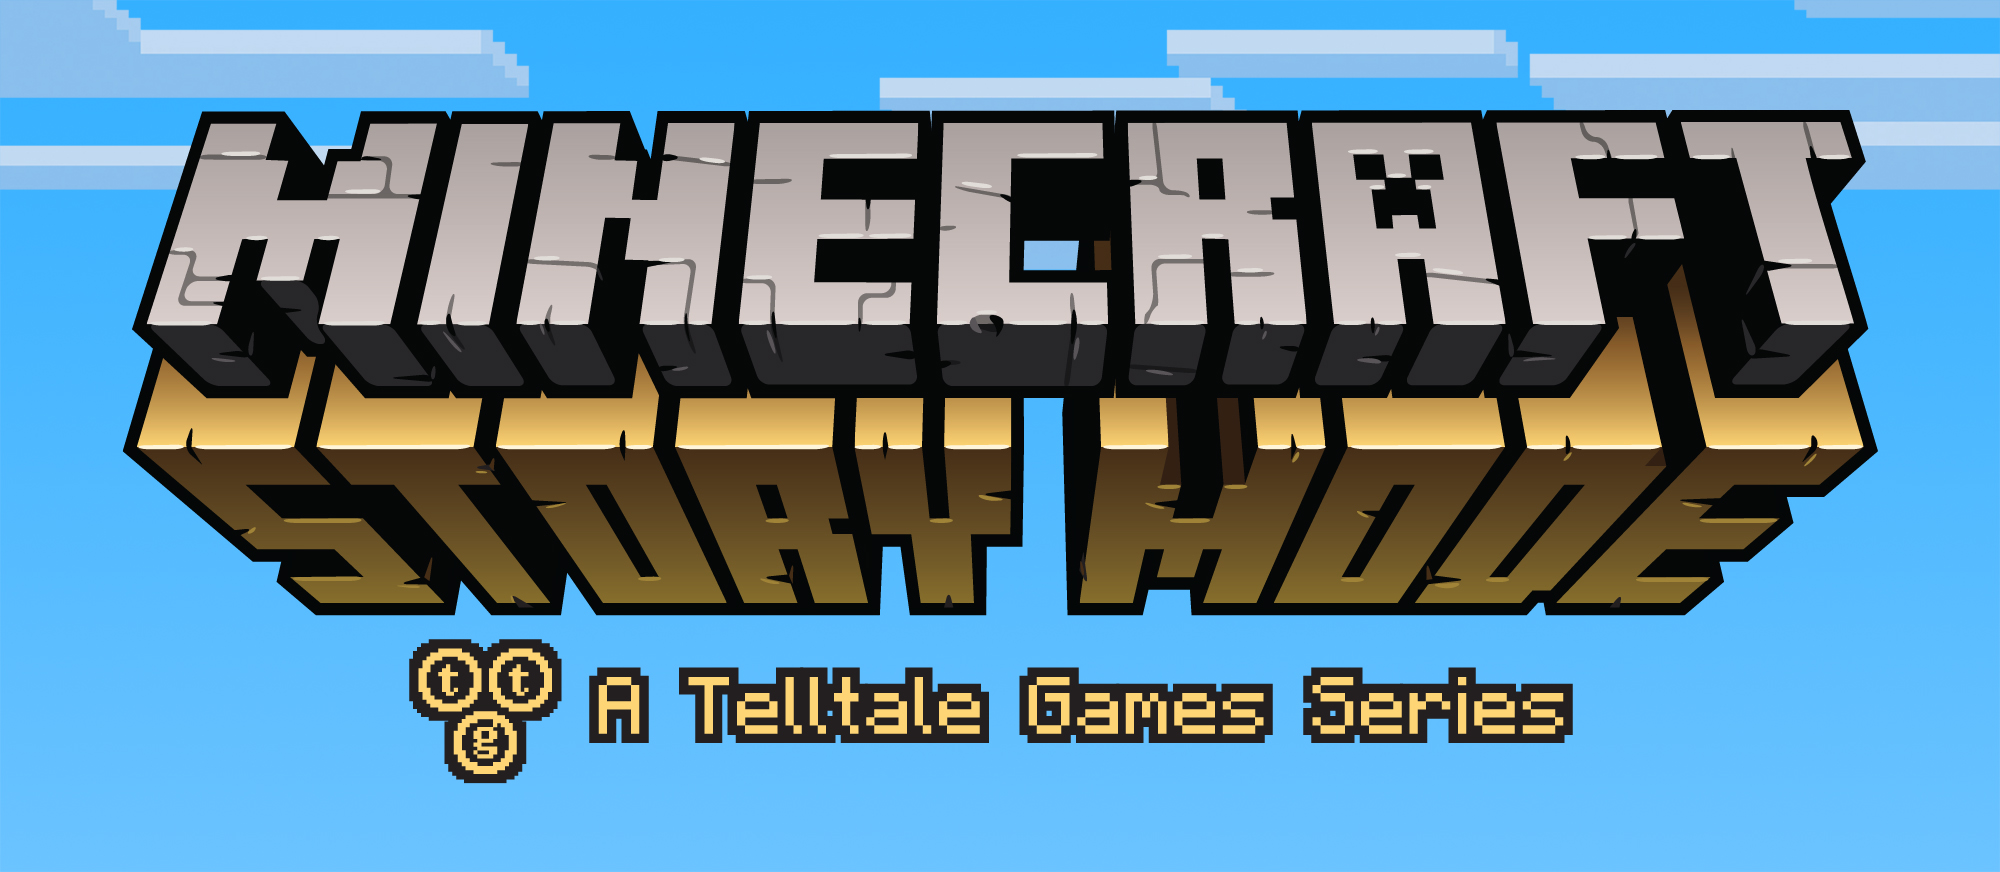 Minecraft: Story Mode Xbox 360 Episodes are Now Downloadable Again